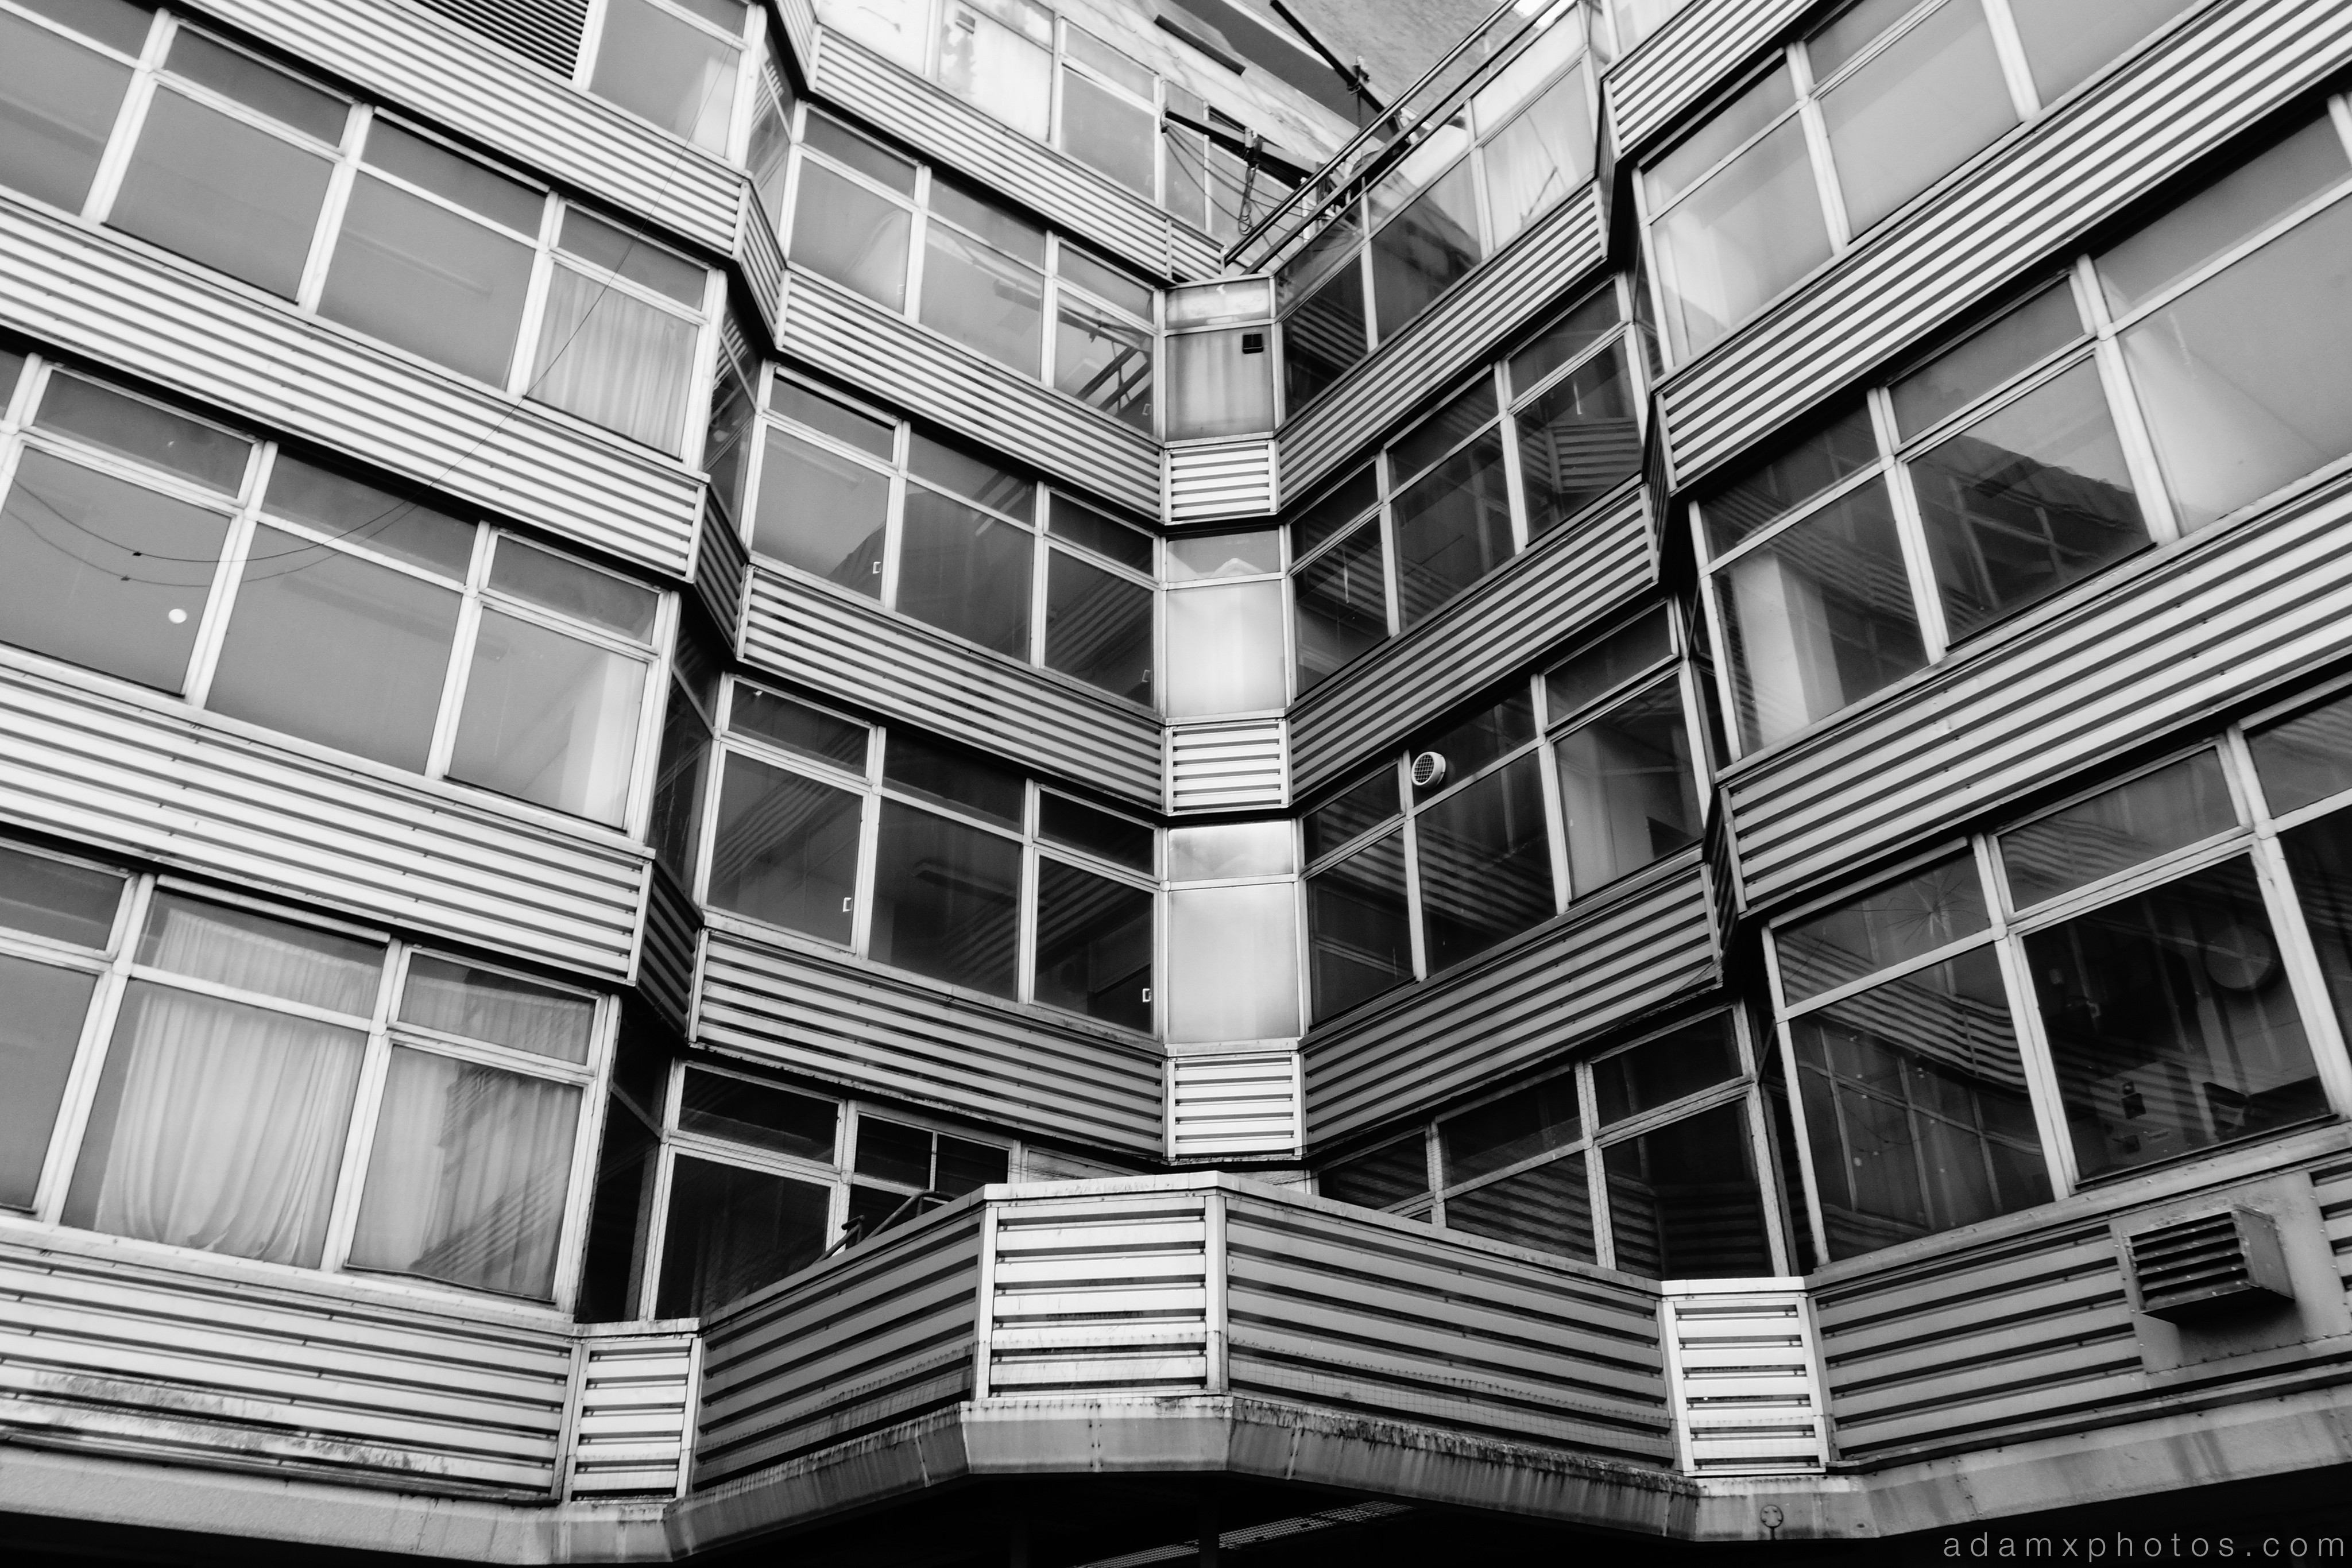 External outside windows Sovereign House HMSO Norwich Urbex Adam X Urban Exploration 2015 Abandoned decay lost forgotten derelict